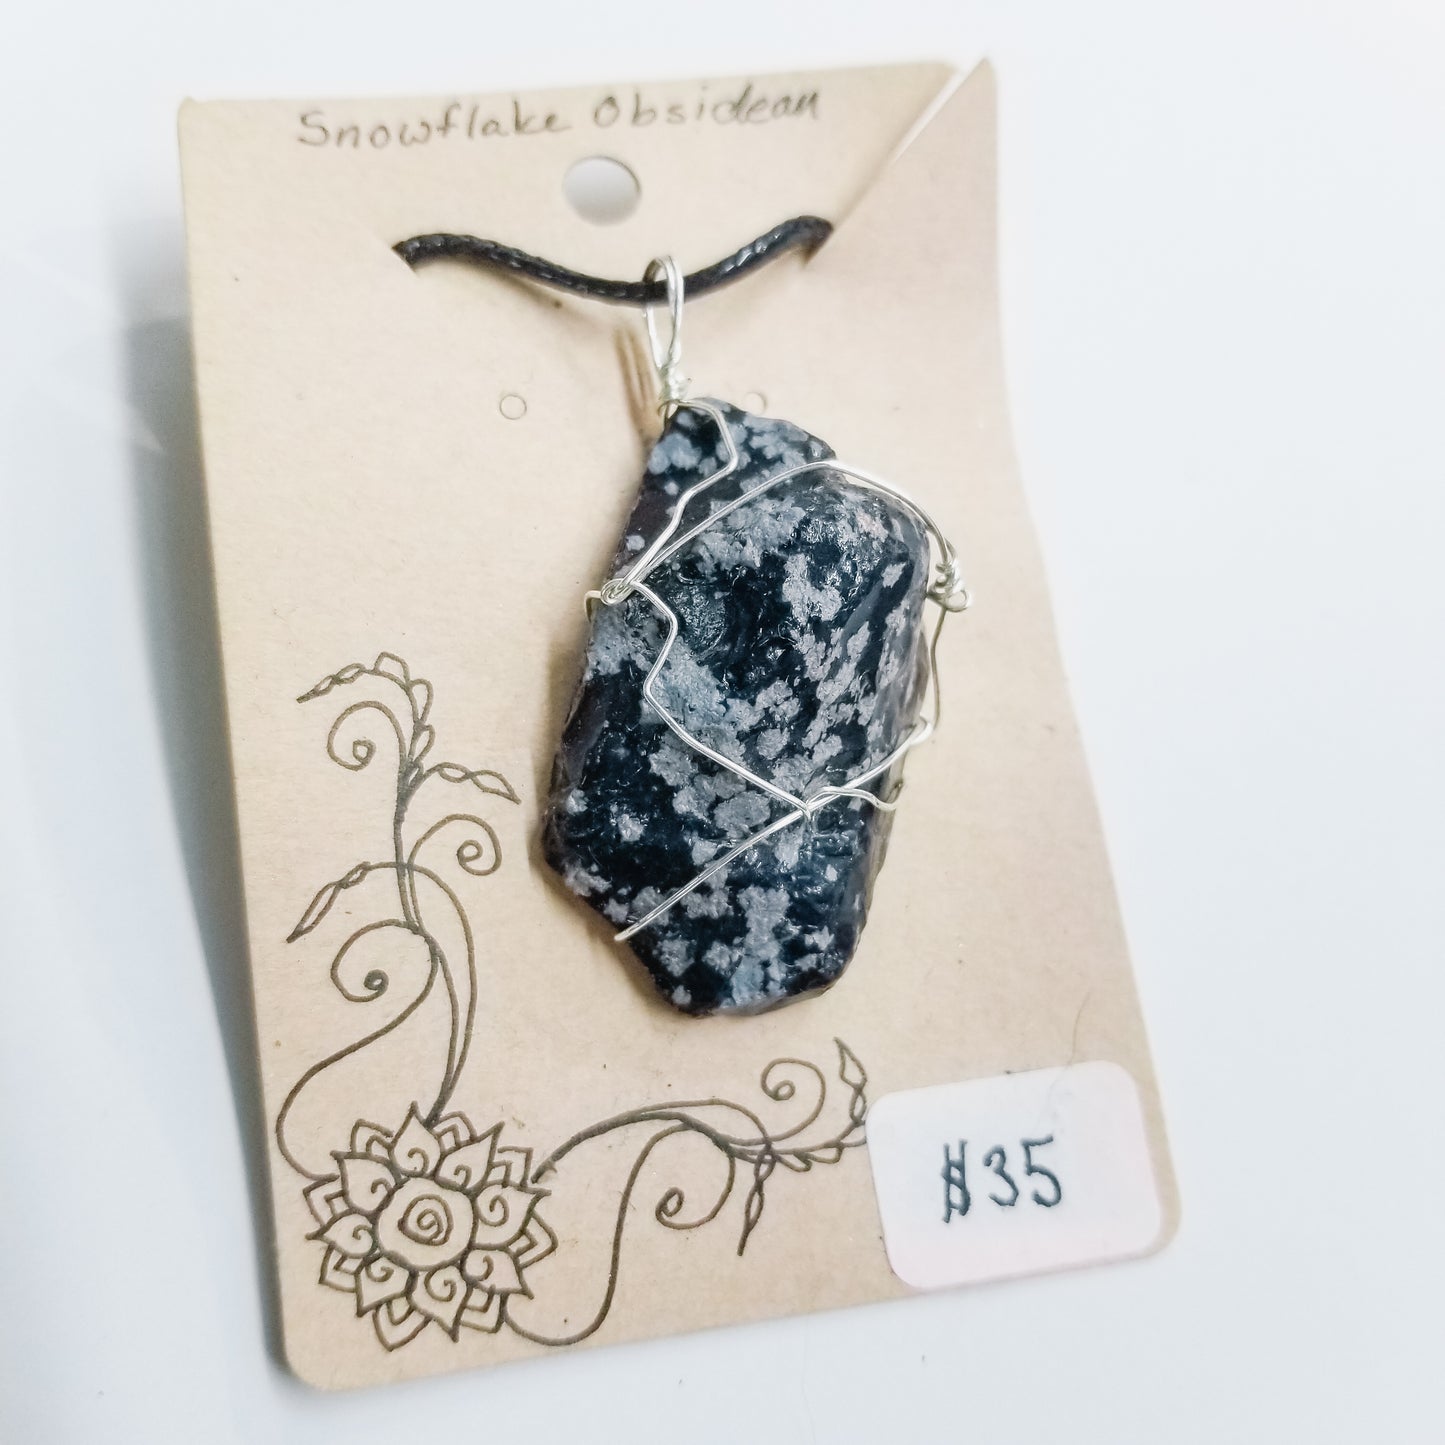 Snowflake Obsidean Handwrapped Necklace